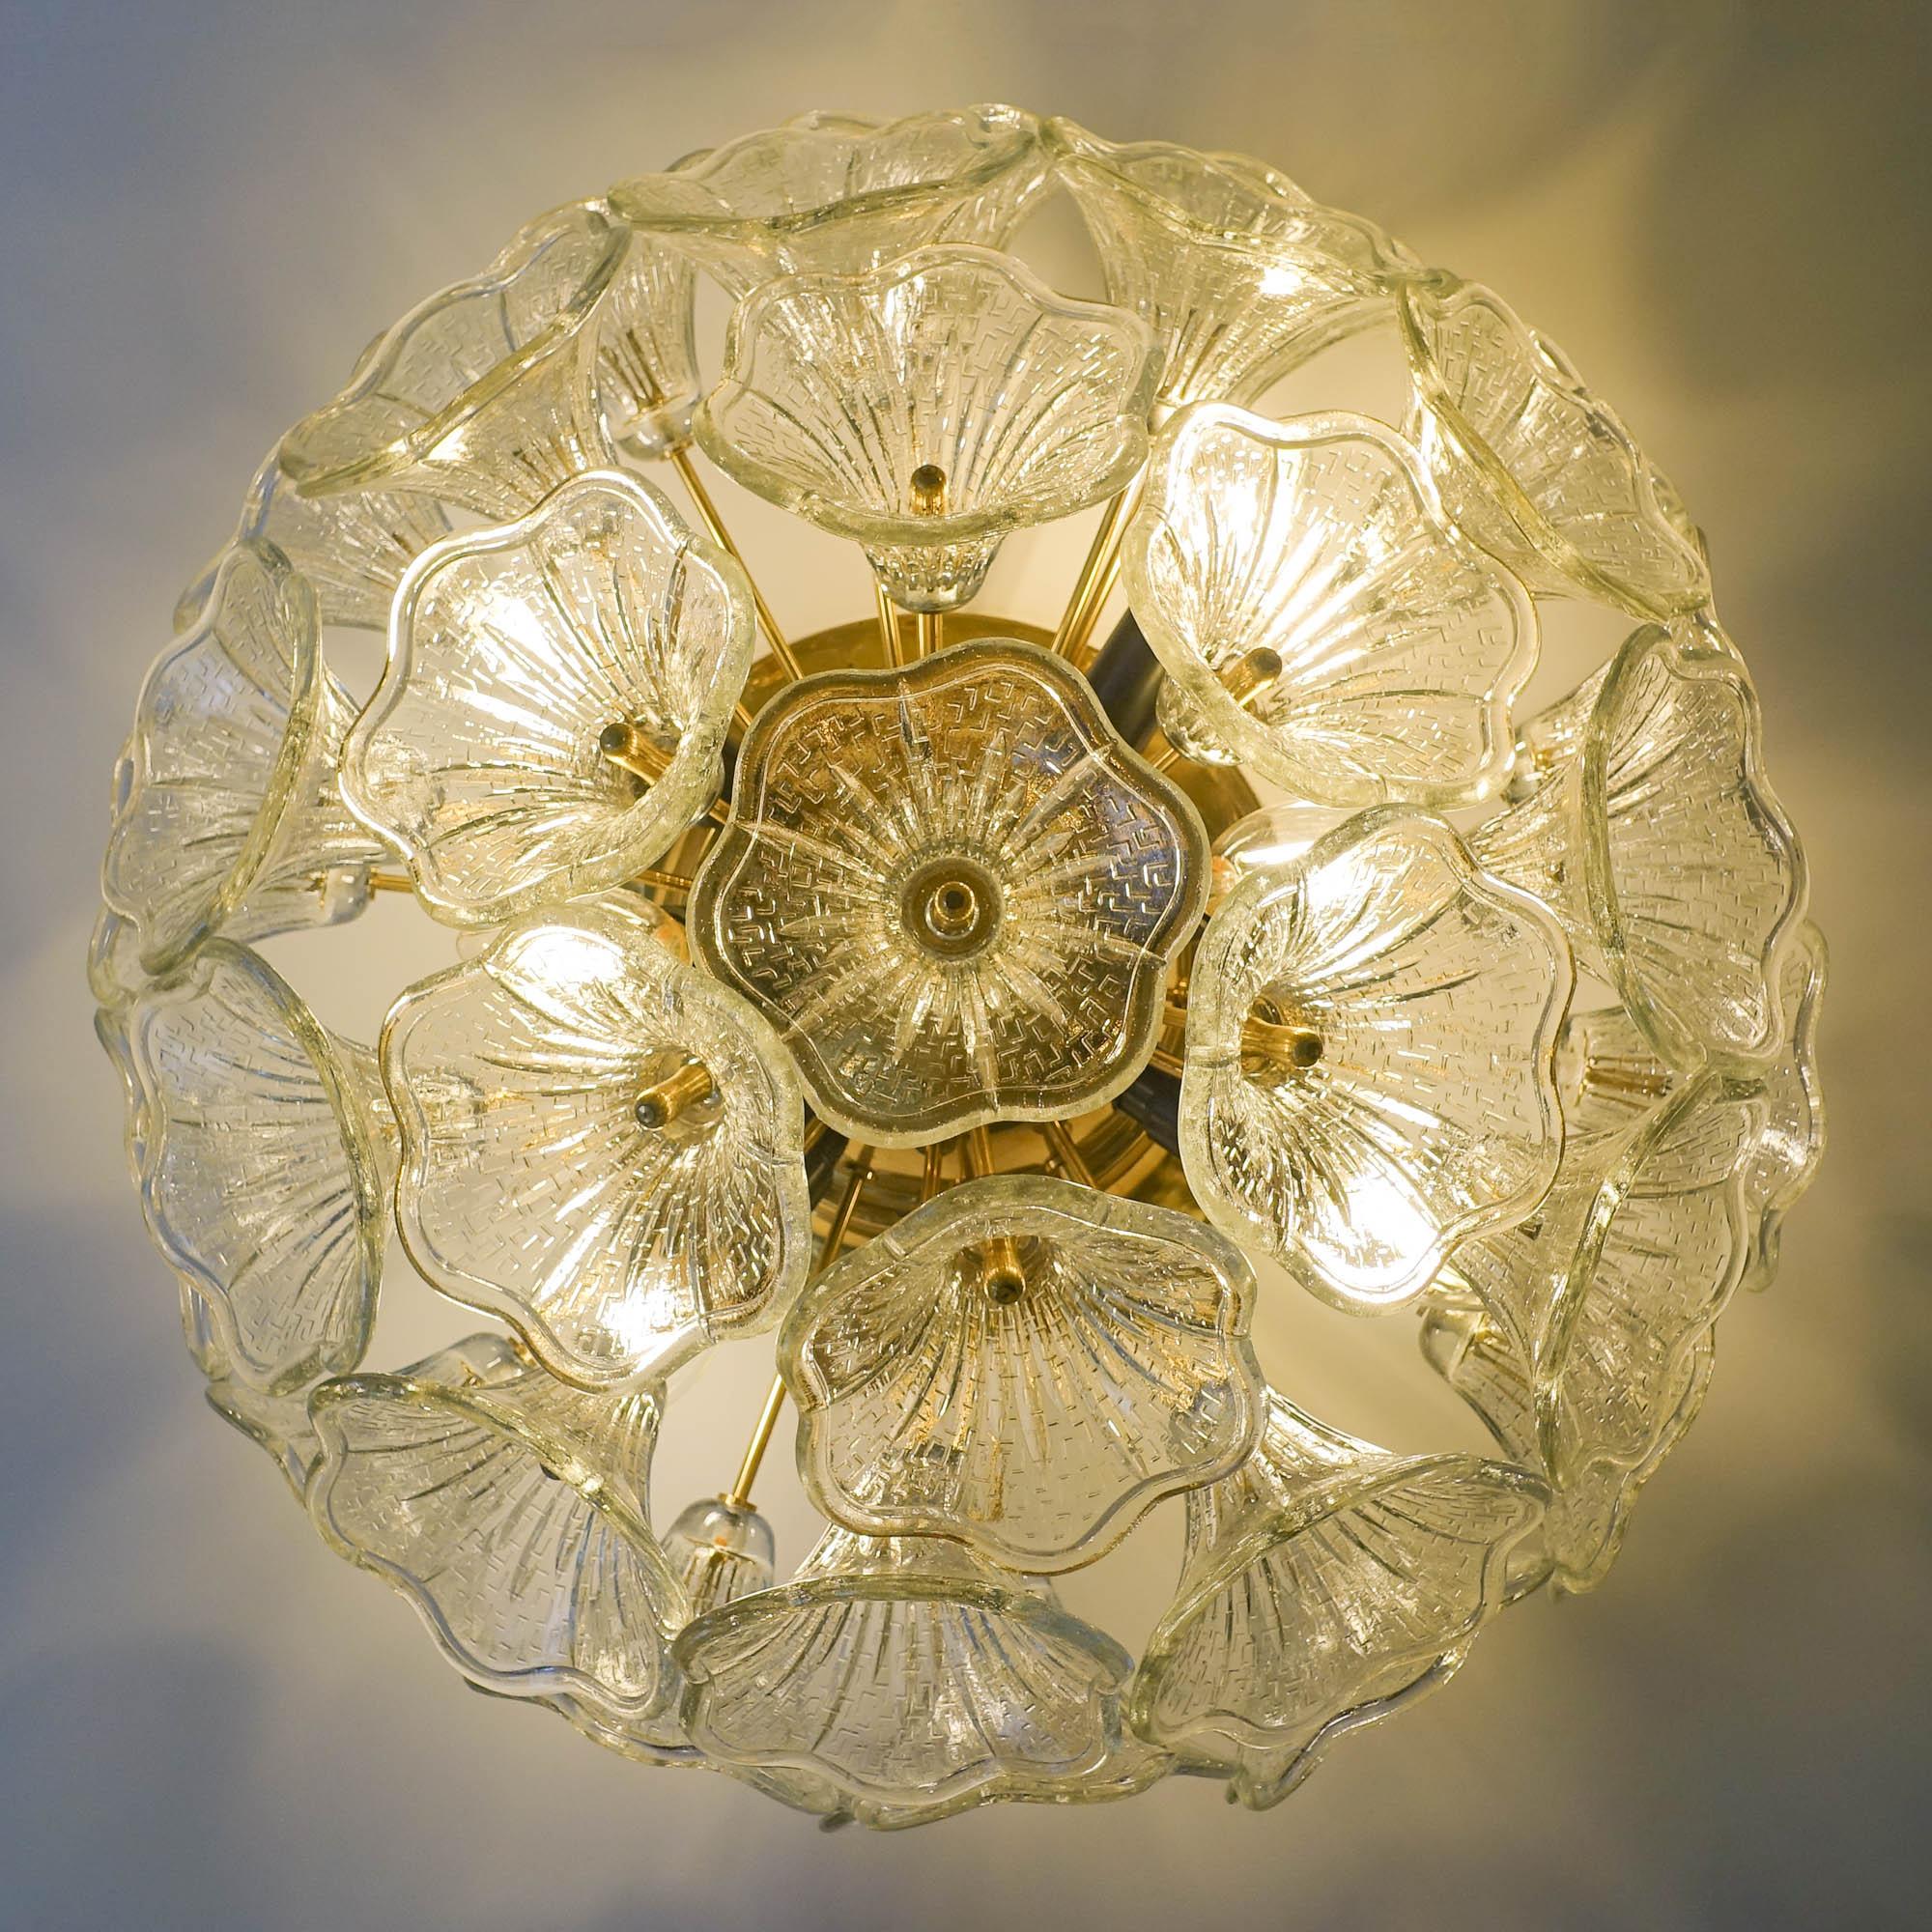 This floral design sputnik ceiling/ wall lamp was designed by Paolo Venini and manufactured by VeArt in Italy, in 1960's. It features a brass base with arms and 32 hand blown crystal flower shaped glasses. It has six E14 bulbs. When lit, the lamps